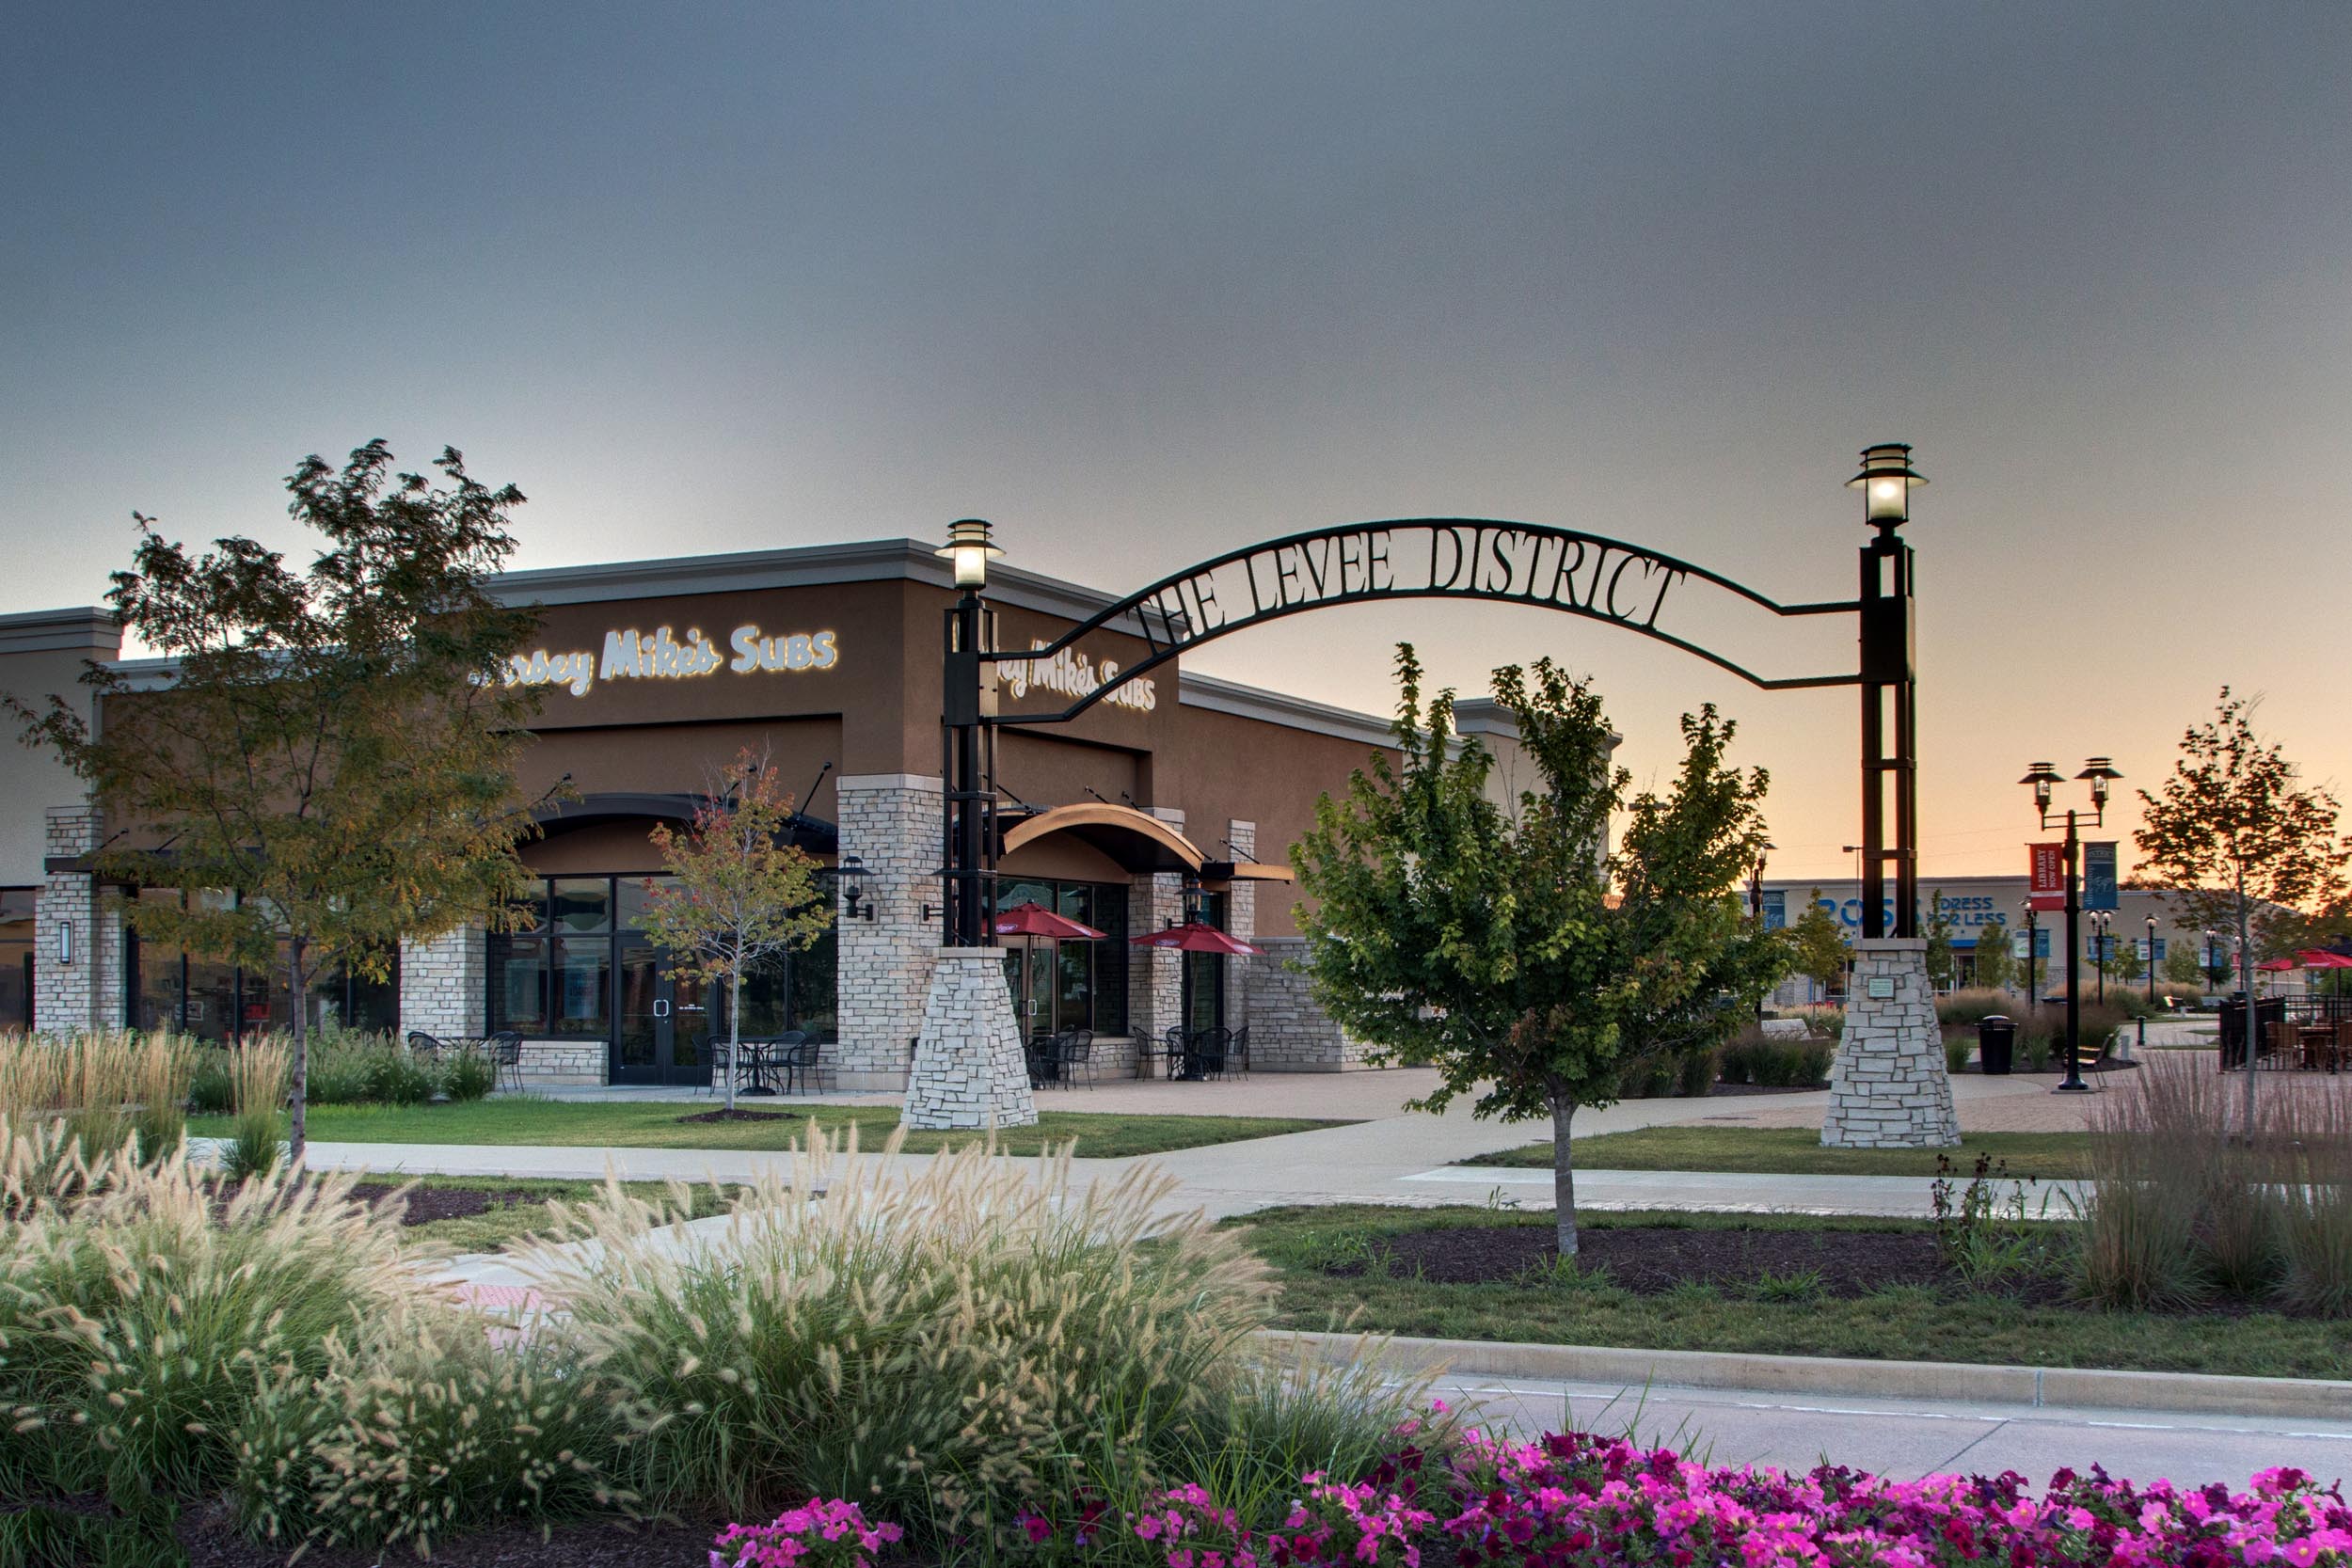 The Levee District development in East Peoria, IL